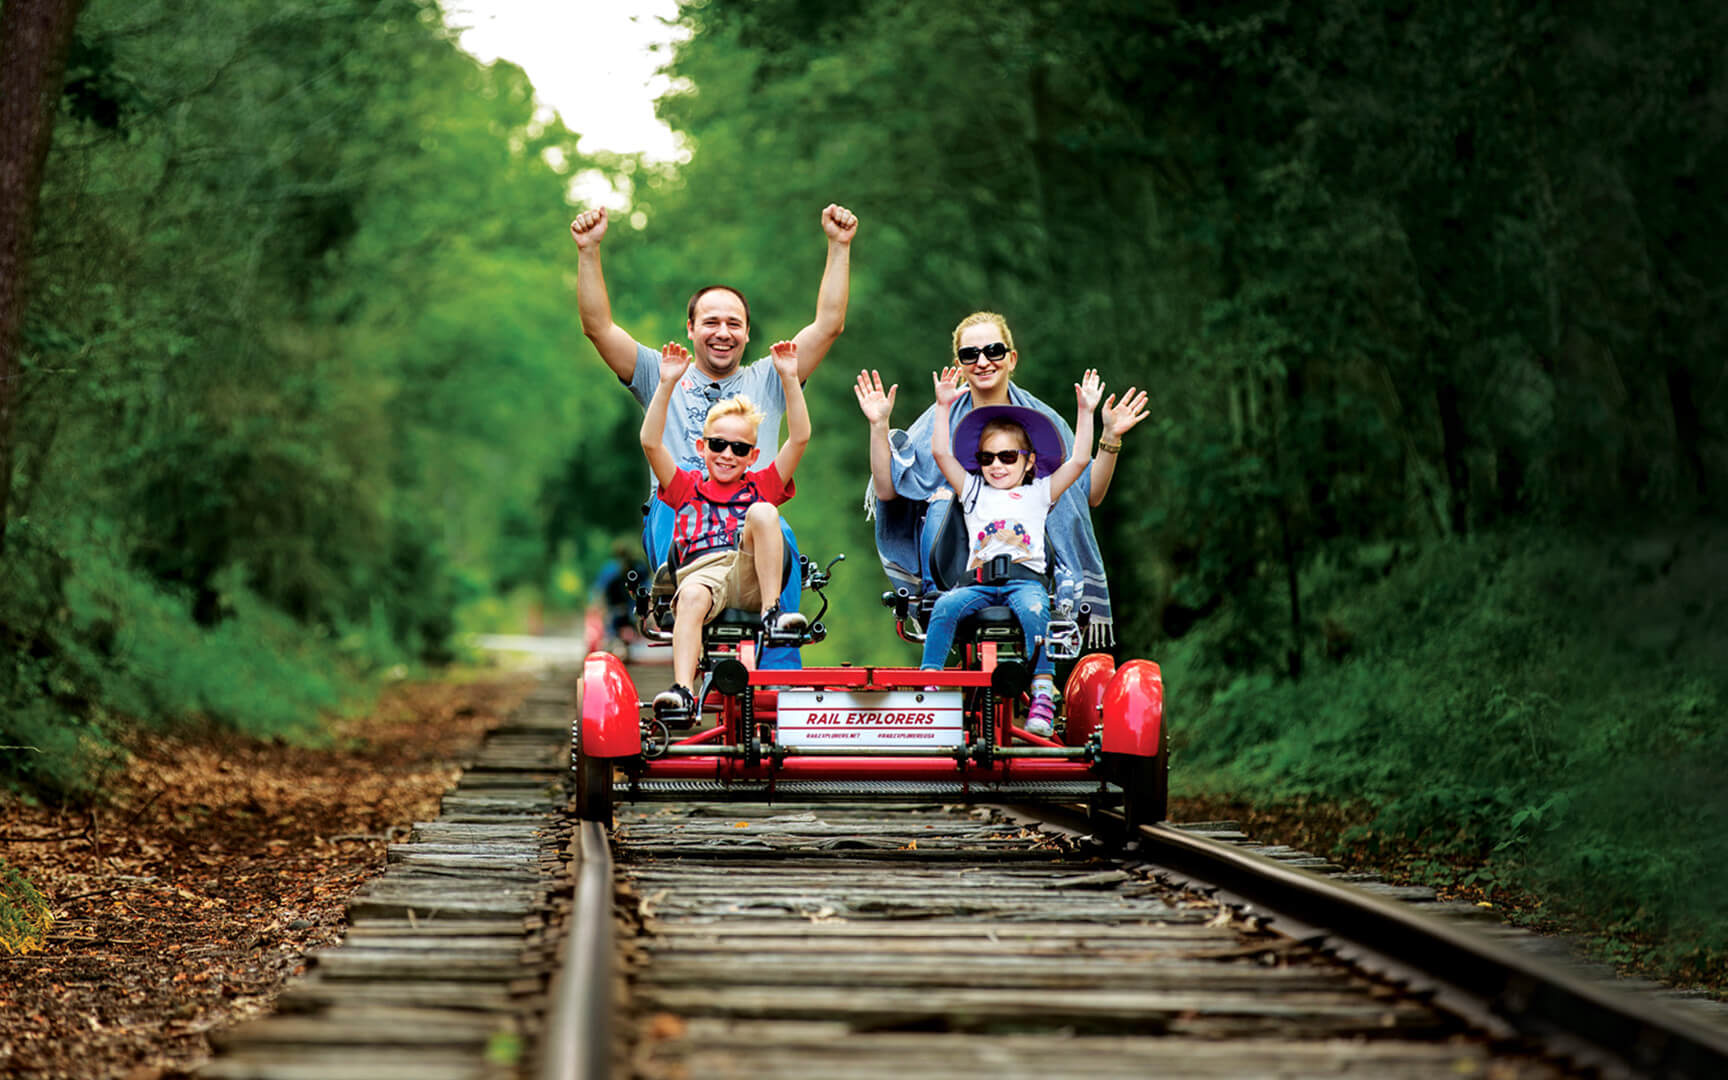 Owners expect Rail Explorers attraction in Boone to open July 21, 2022